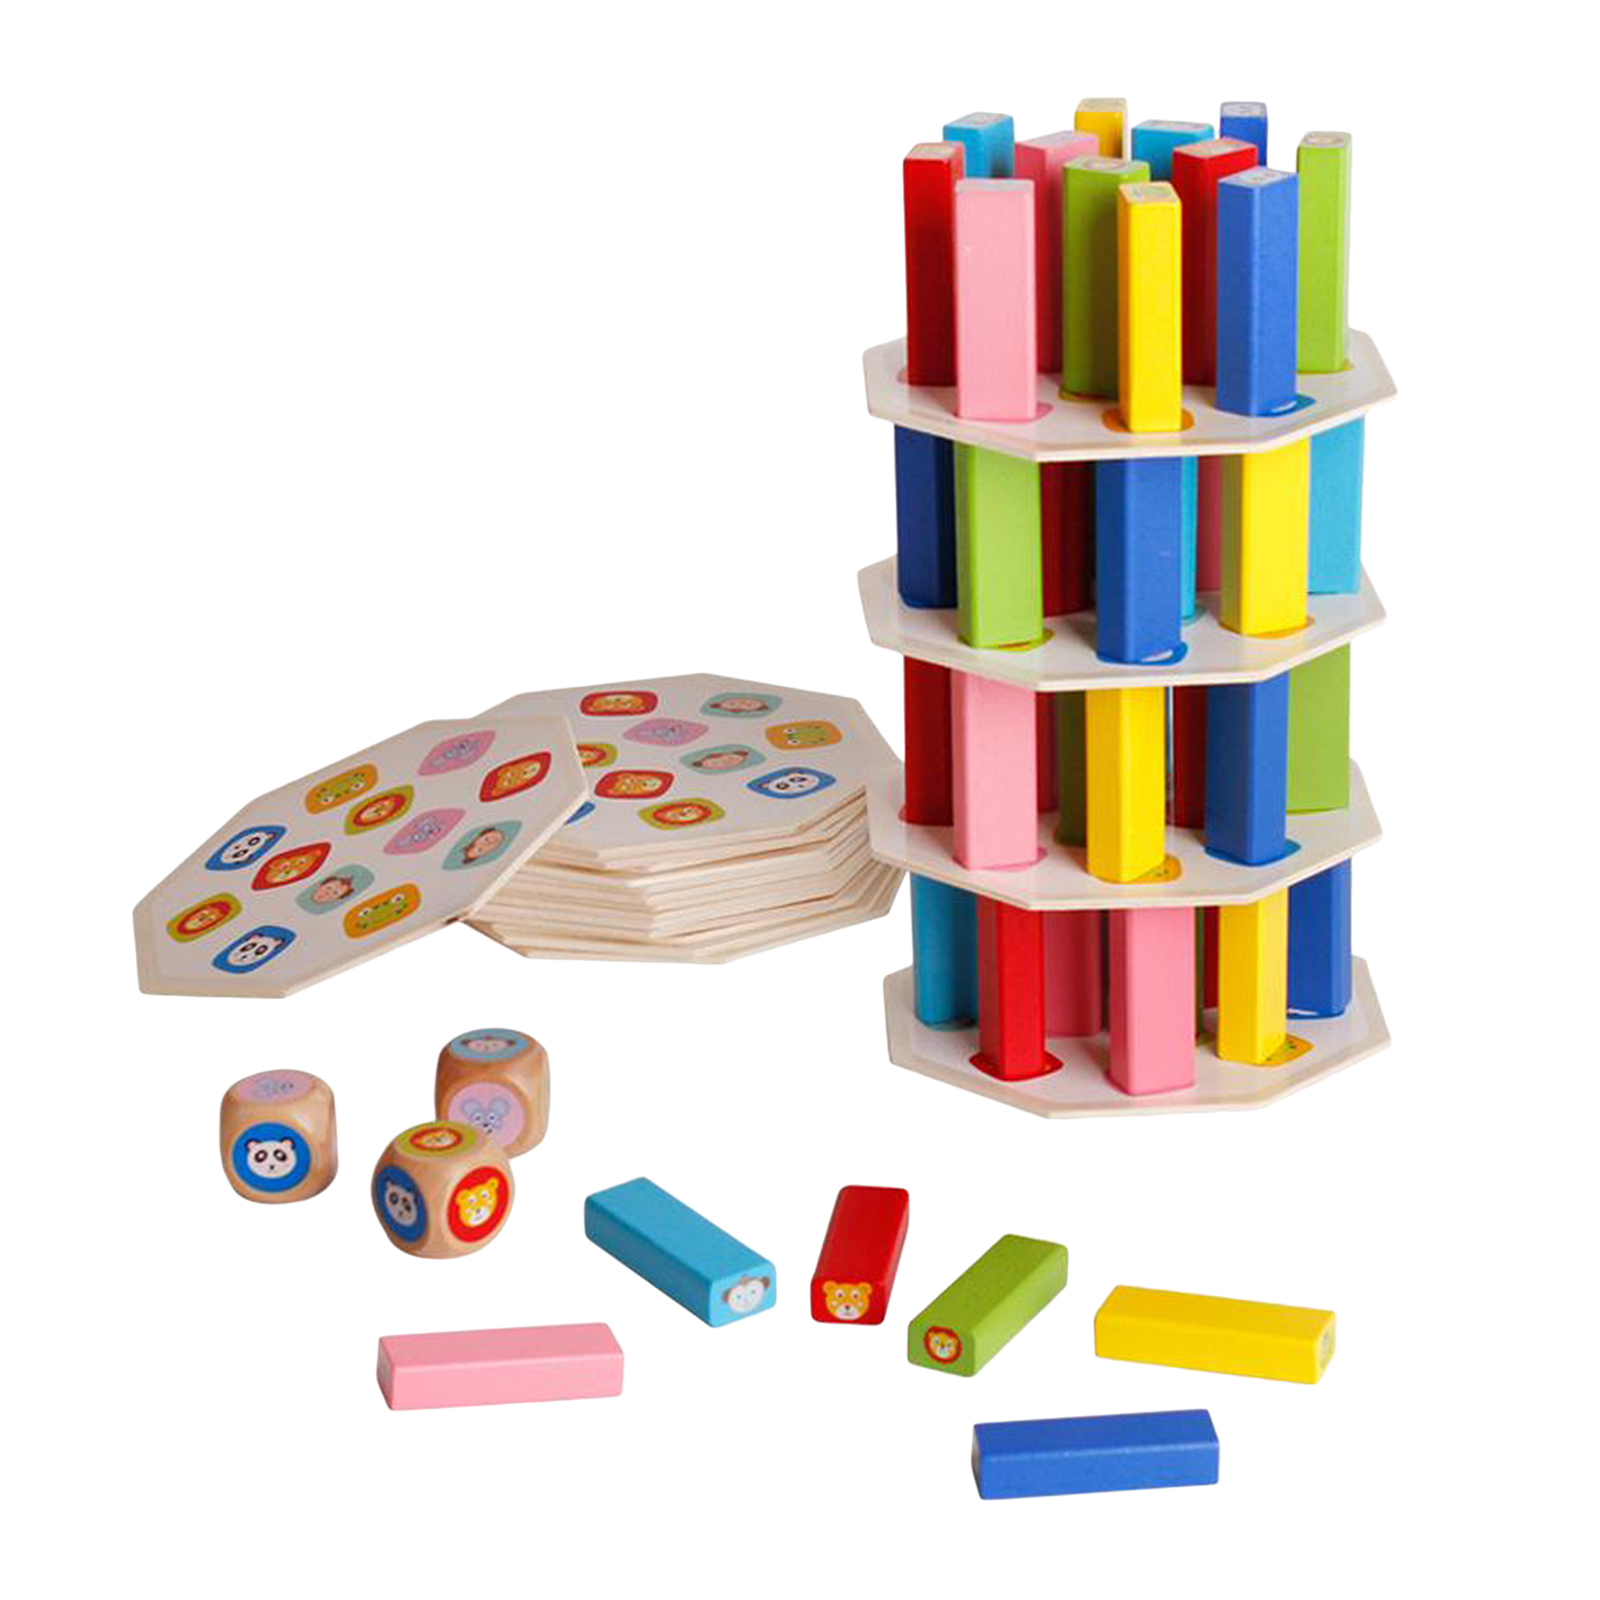 Funny Wooden Tower Hardwood Domino Stacking Building Blocks Toy Montessori Educational Game for Kids Children Gift